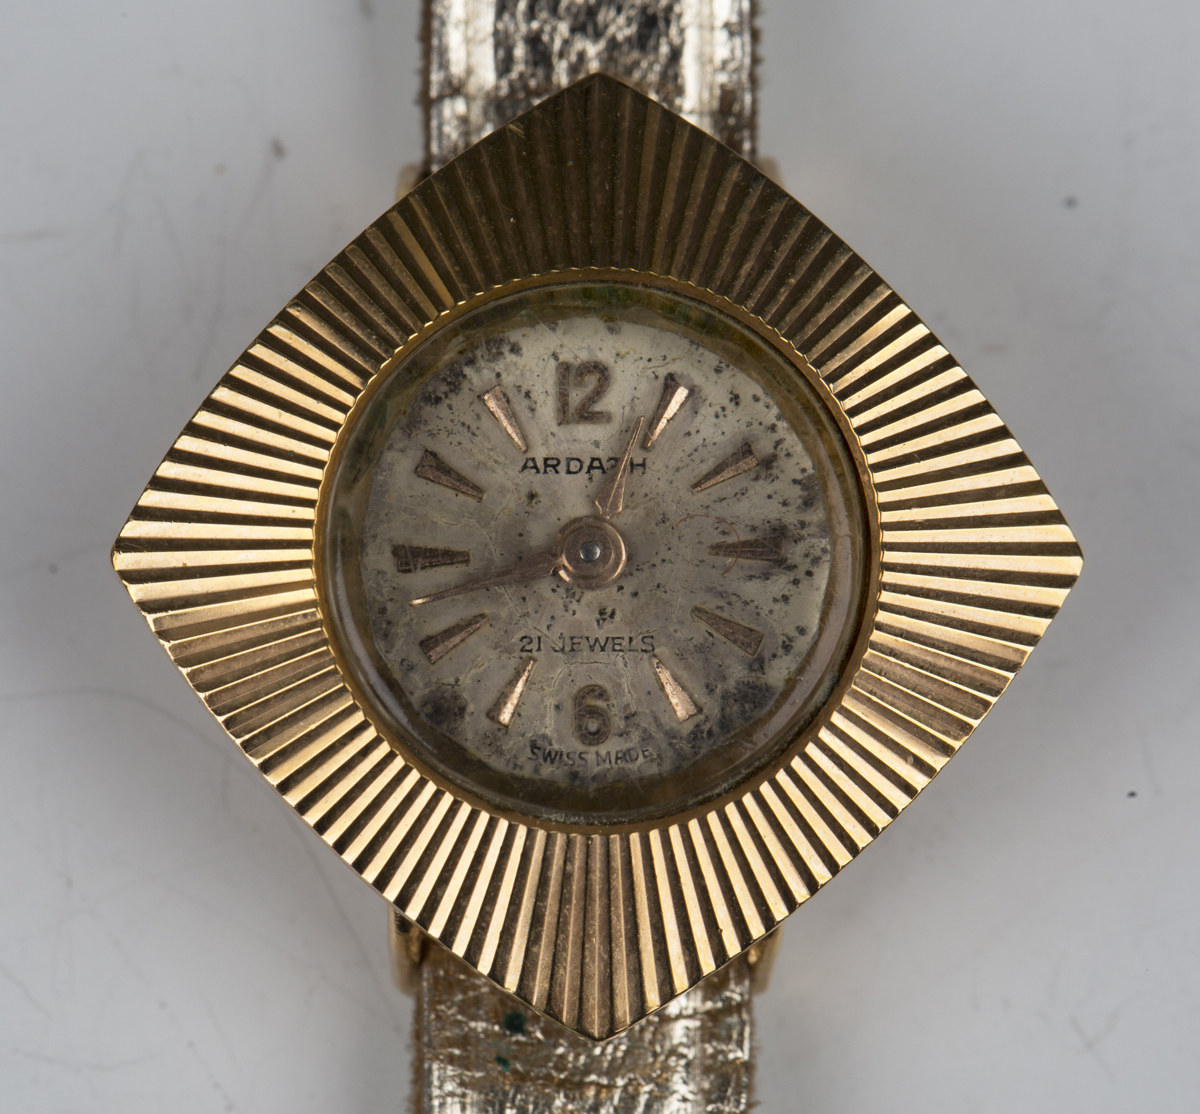 An Ardath Convertible gilt metal lady's dress wristwatch, circa 1950s, with a selection of seven - Image 3 of 3